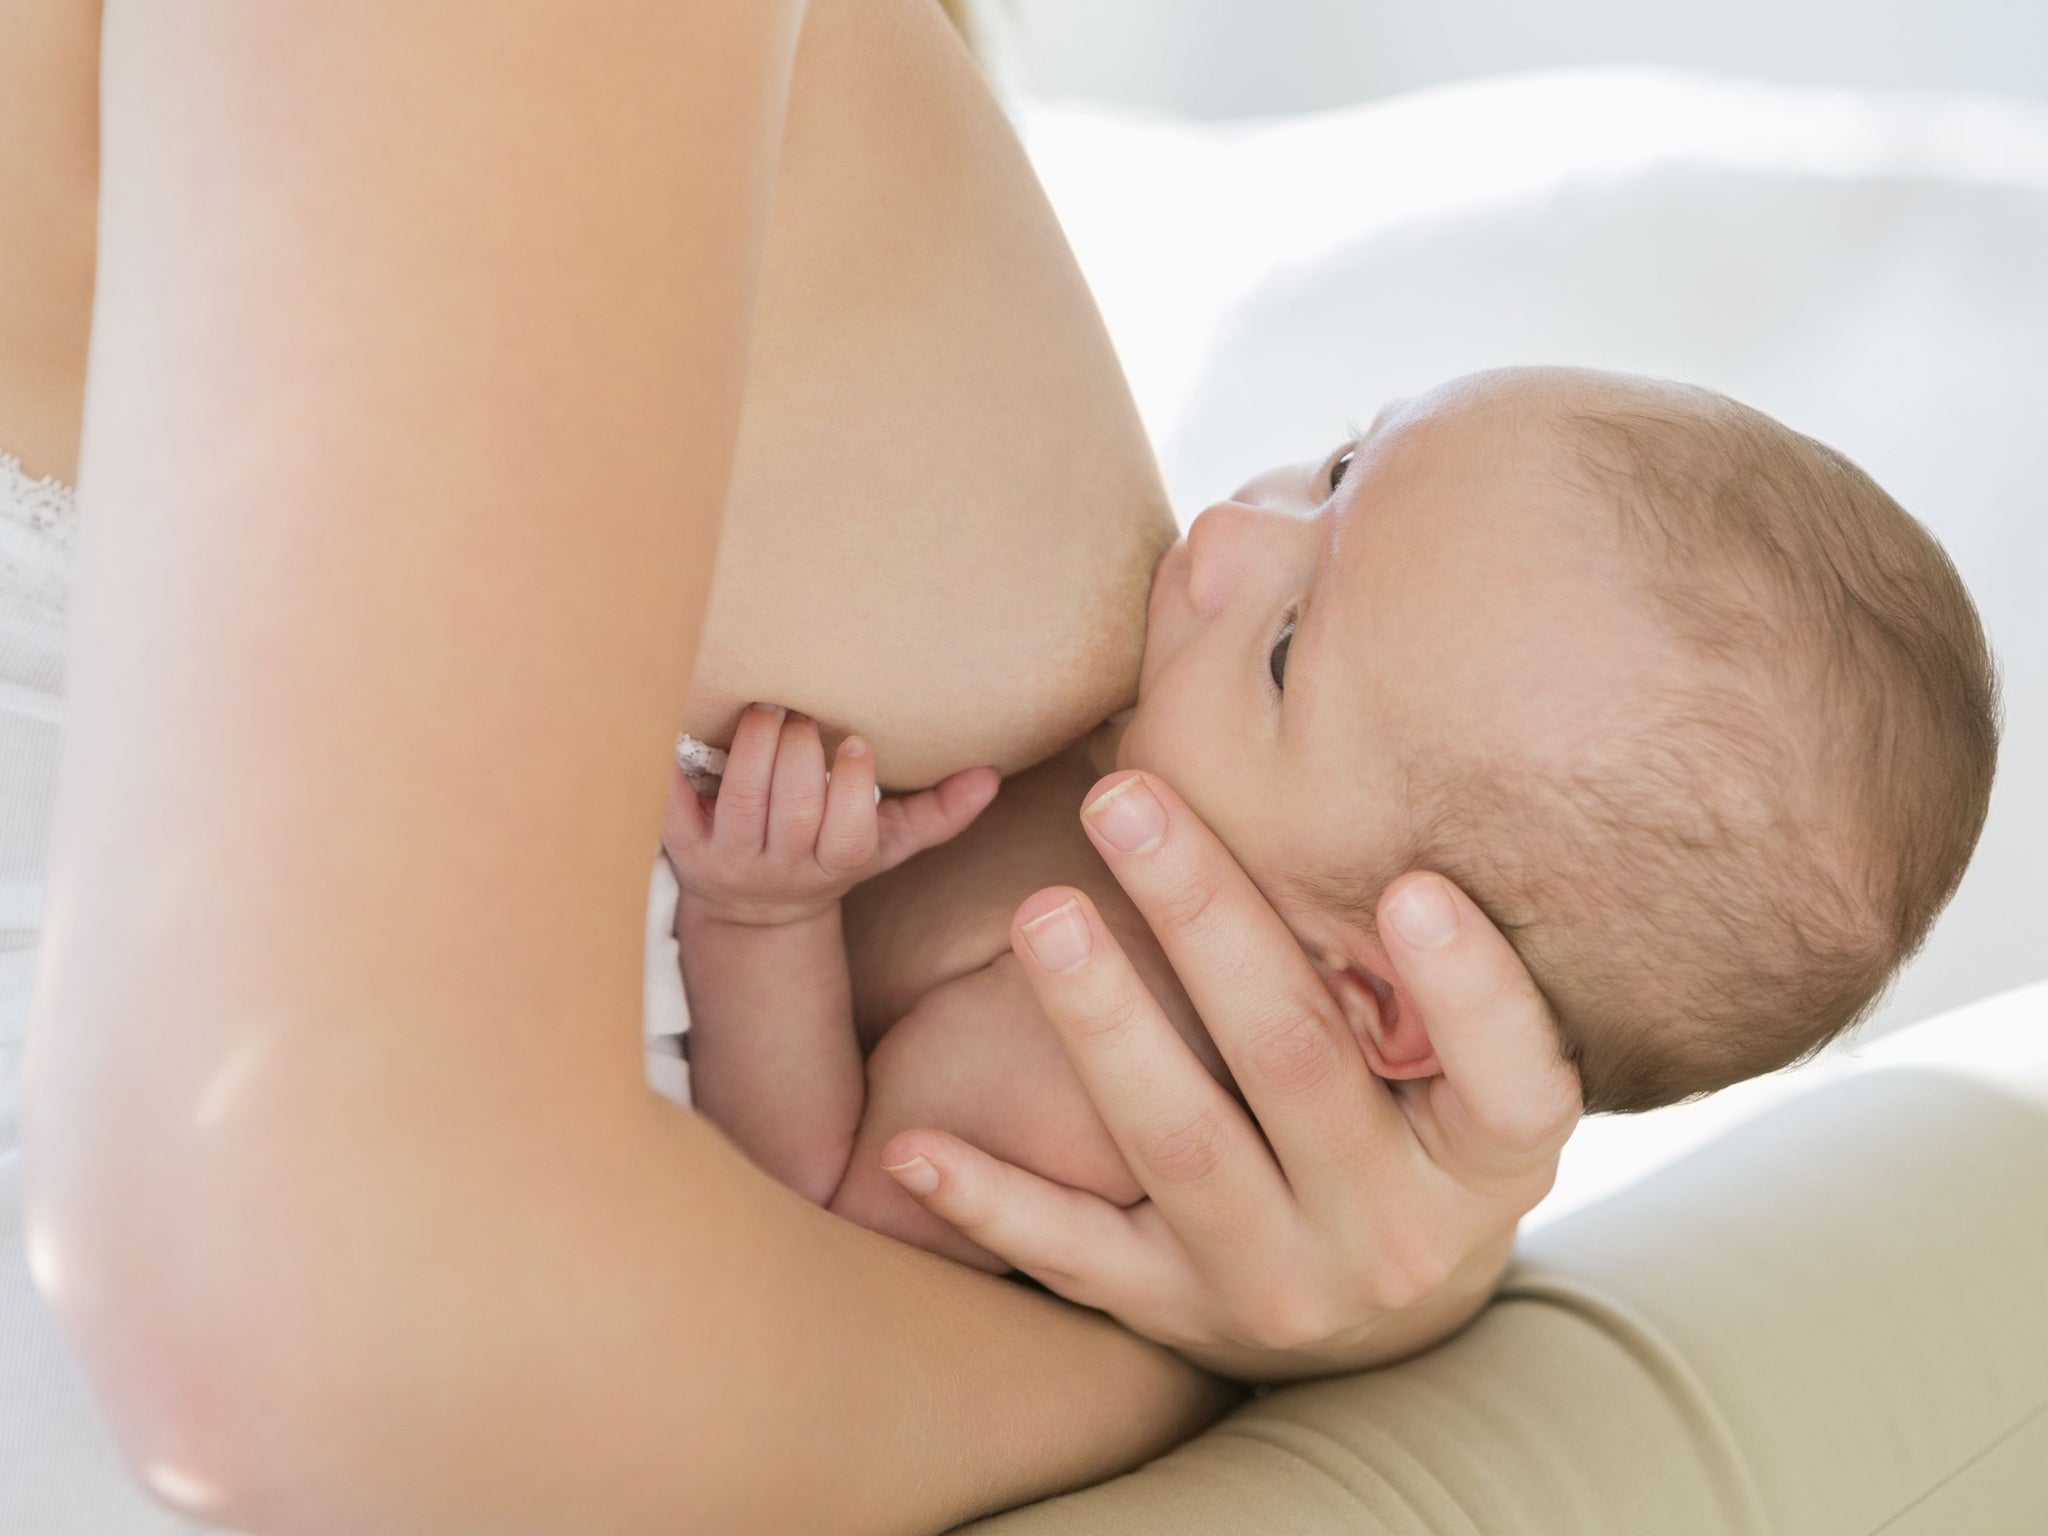 A study has suggested breastfeeding might reduce women's risk of Alzheimer's disease